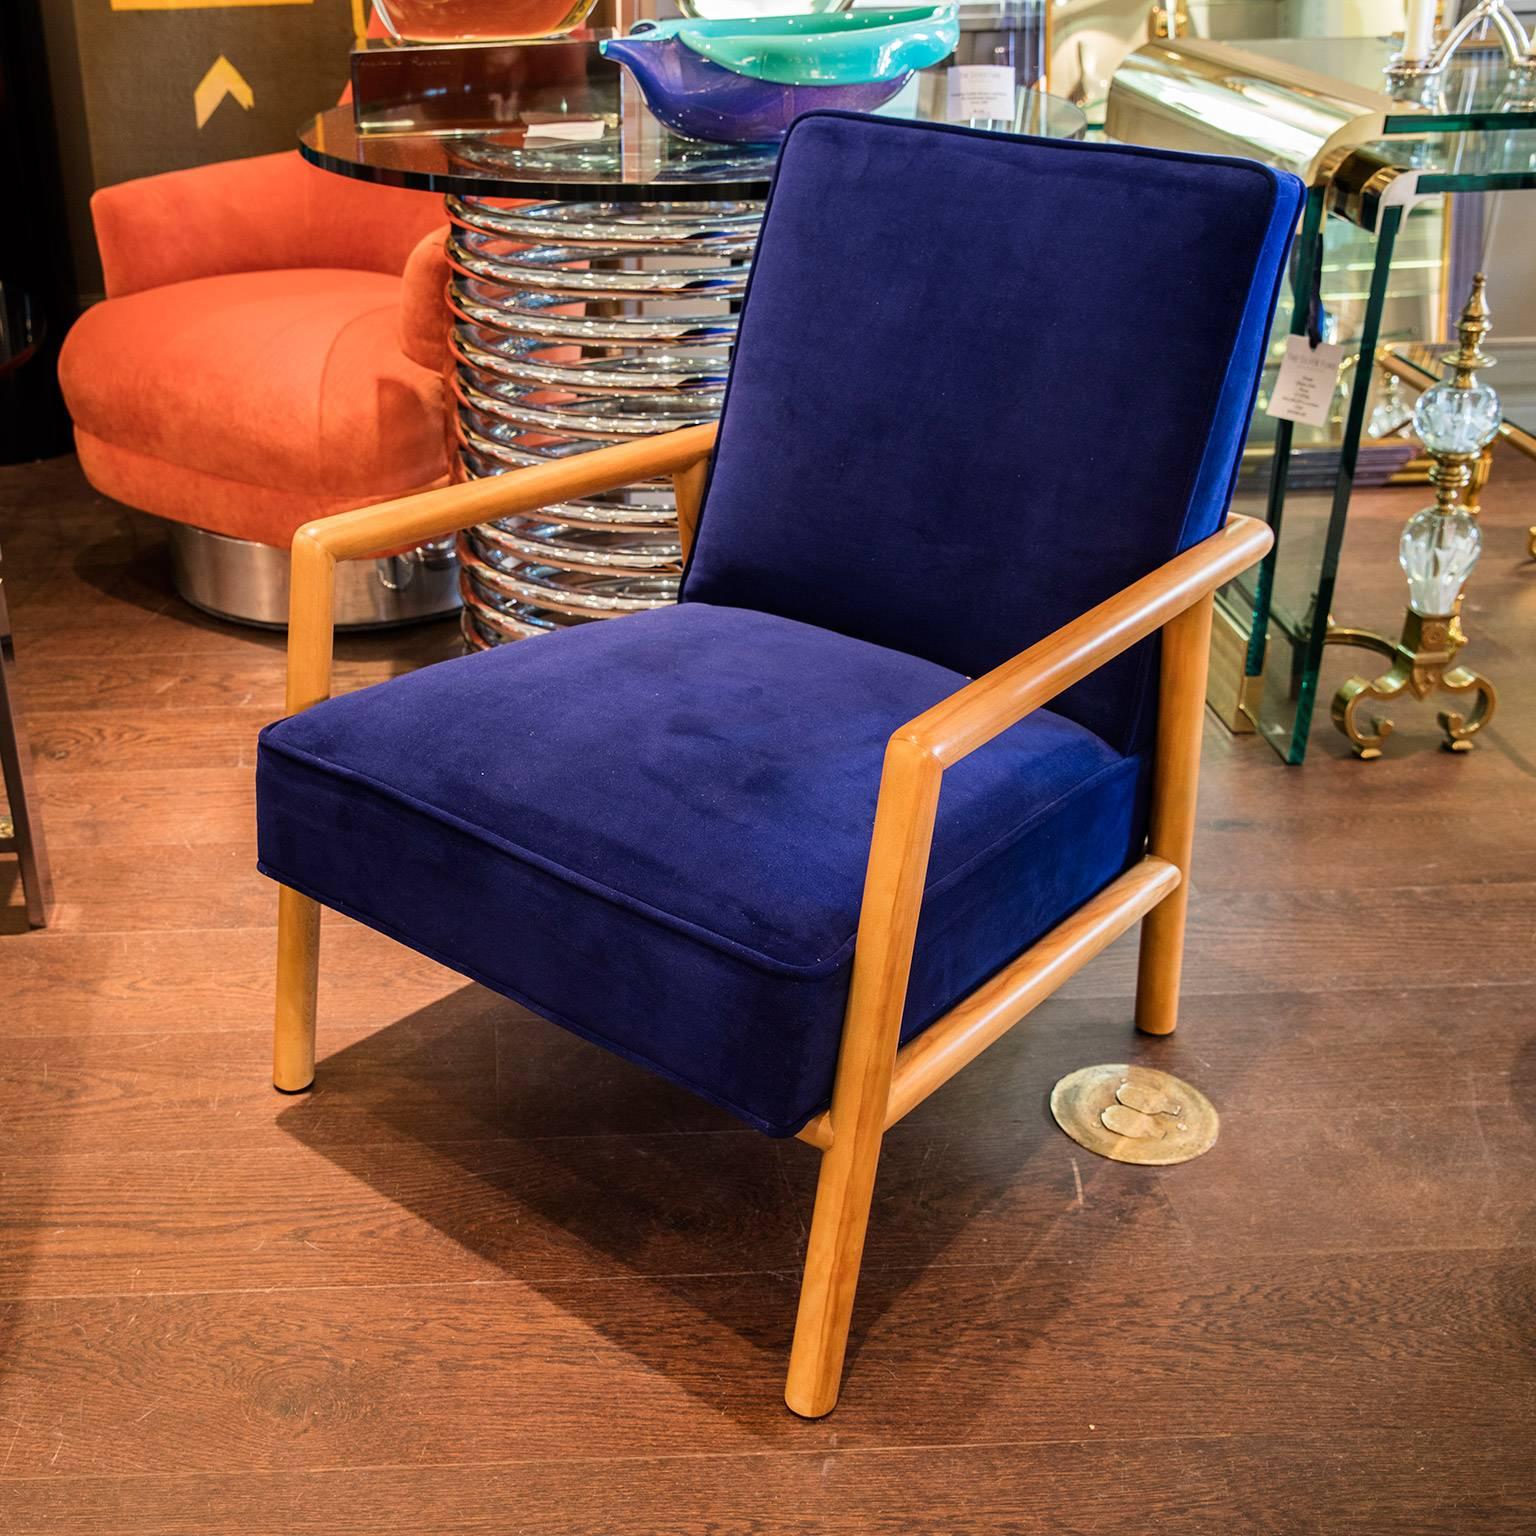 Pair of T.H. Robsjohn-Gibbings blue lounge chairs with original wood finish in excellent condition. Newly upholstered in a vibrant blue material.